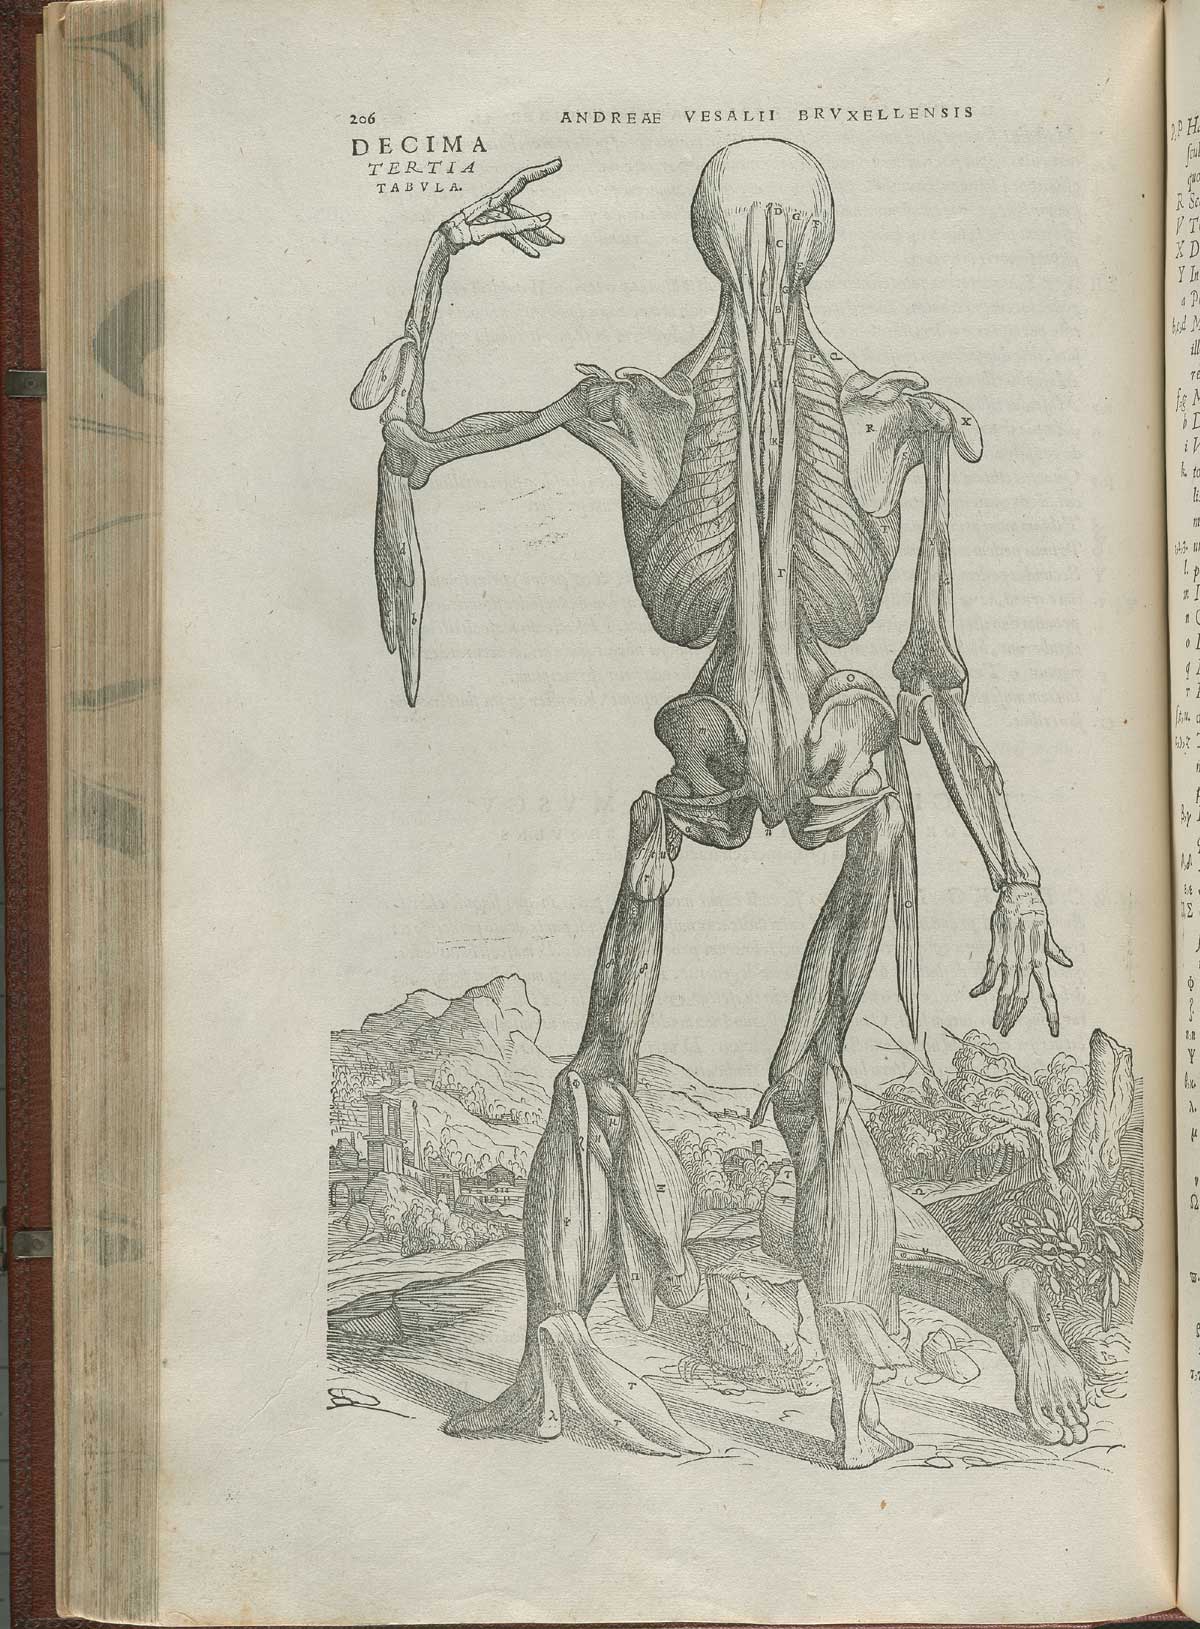 Page 206 of Andreas Vesalius' De corporis humani fabrica libri septem, featuring the illustrated woodcut of the thirteenth muscle plate, a full-length posterior view of a flayed corpse of mostly bones with the muscles of the back of the body hanging off the bones.